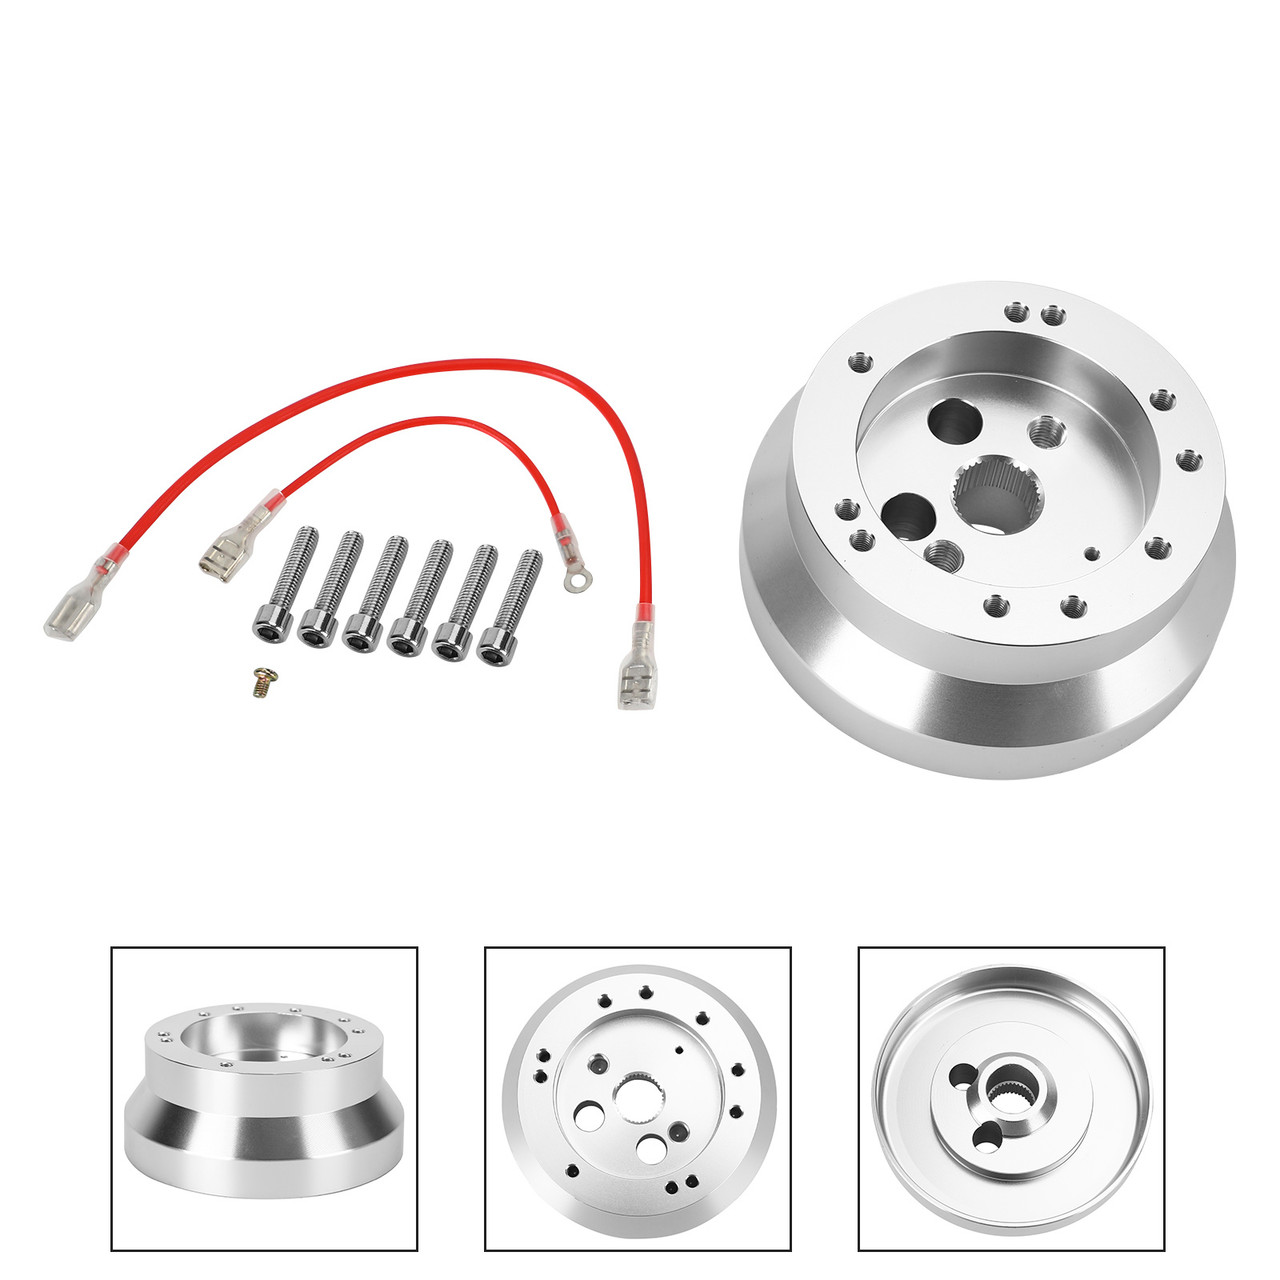 5 & 6 Hole Steering Wheel Short Hub Adapter Kit Fit for BUICK All Models w/non-telescopic column 69-93 Silver